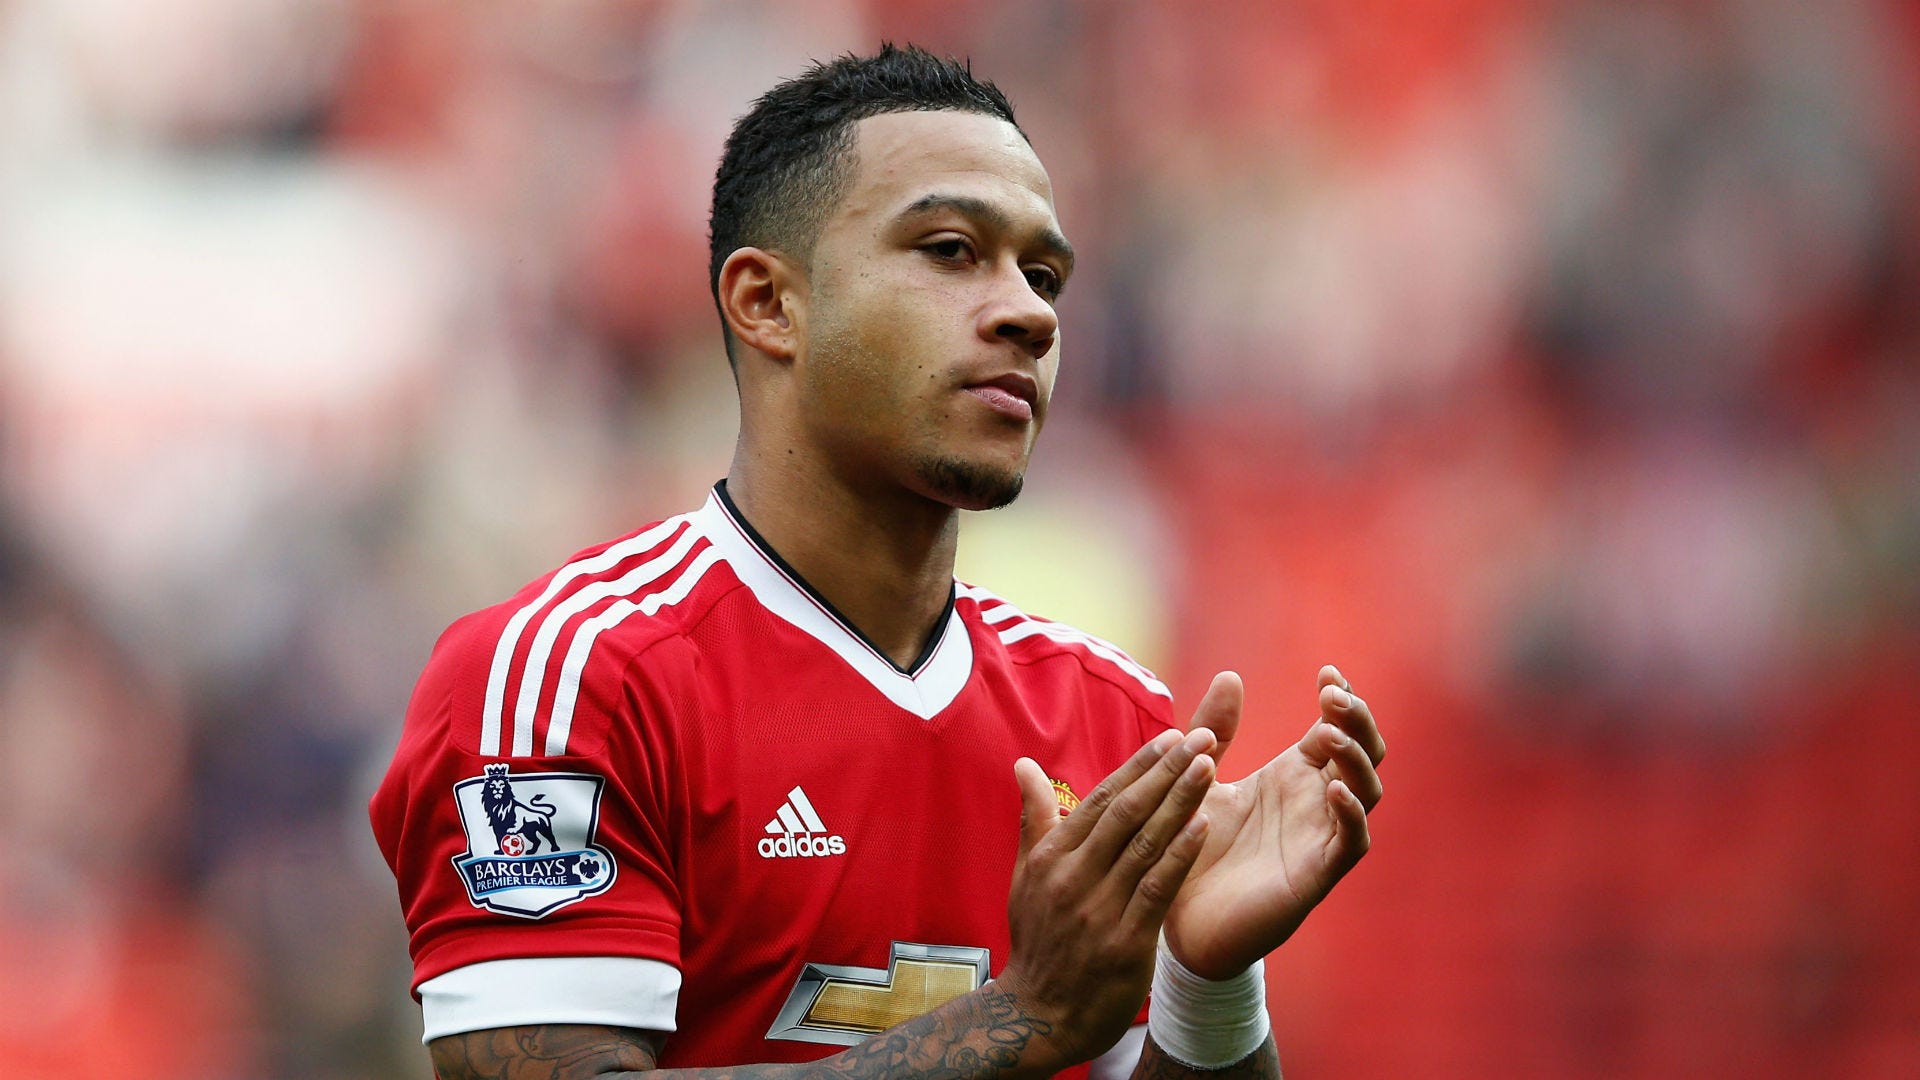 Former Manchester United star Memphis Depay shows off new giant